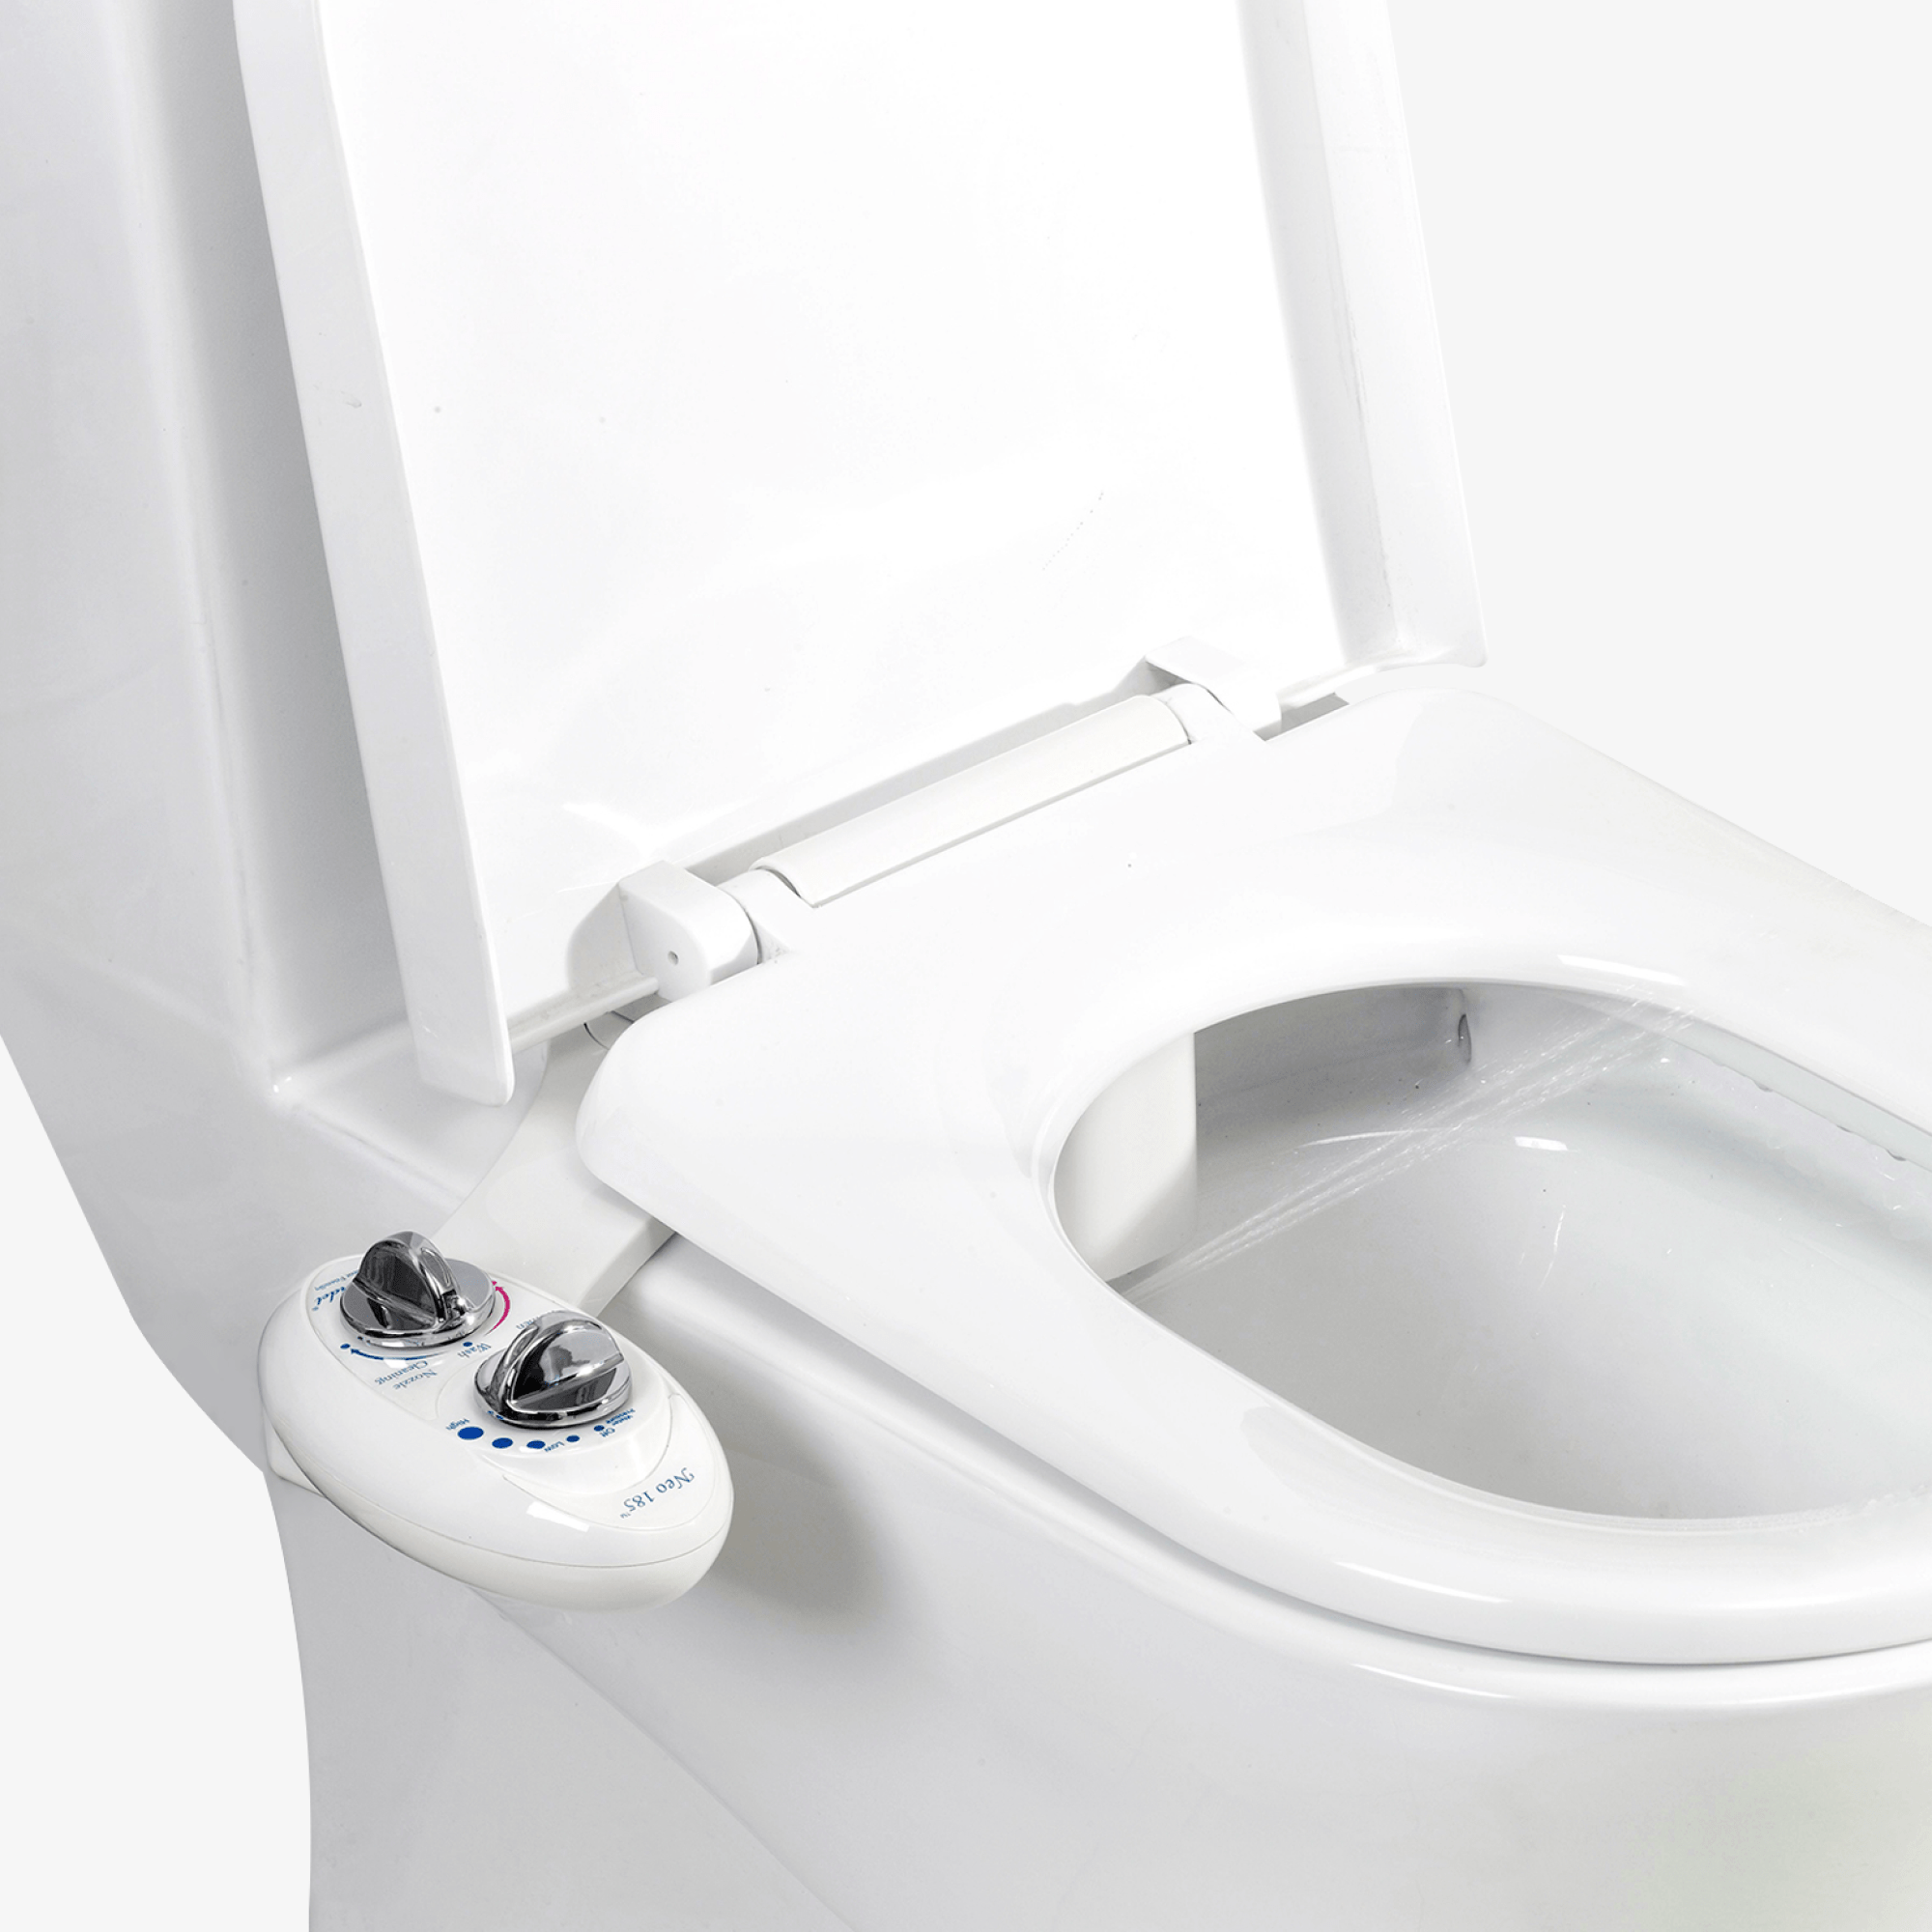 NEO 185: Imperfect Packaging - NEO 185 W85 Pearl Gray installed on a toilet with water spraying from nozzles